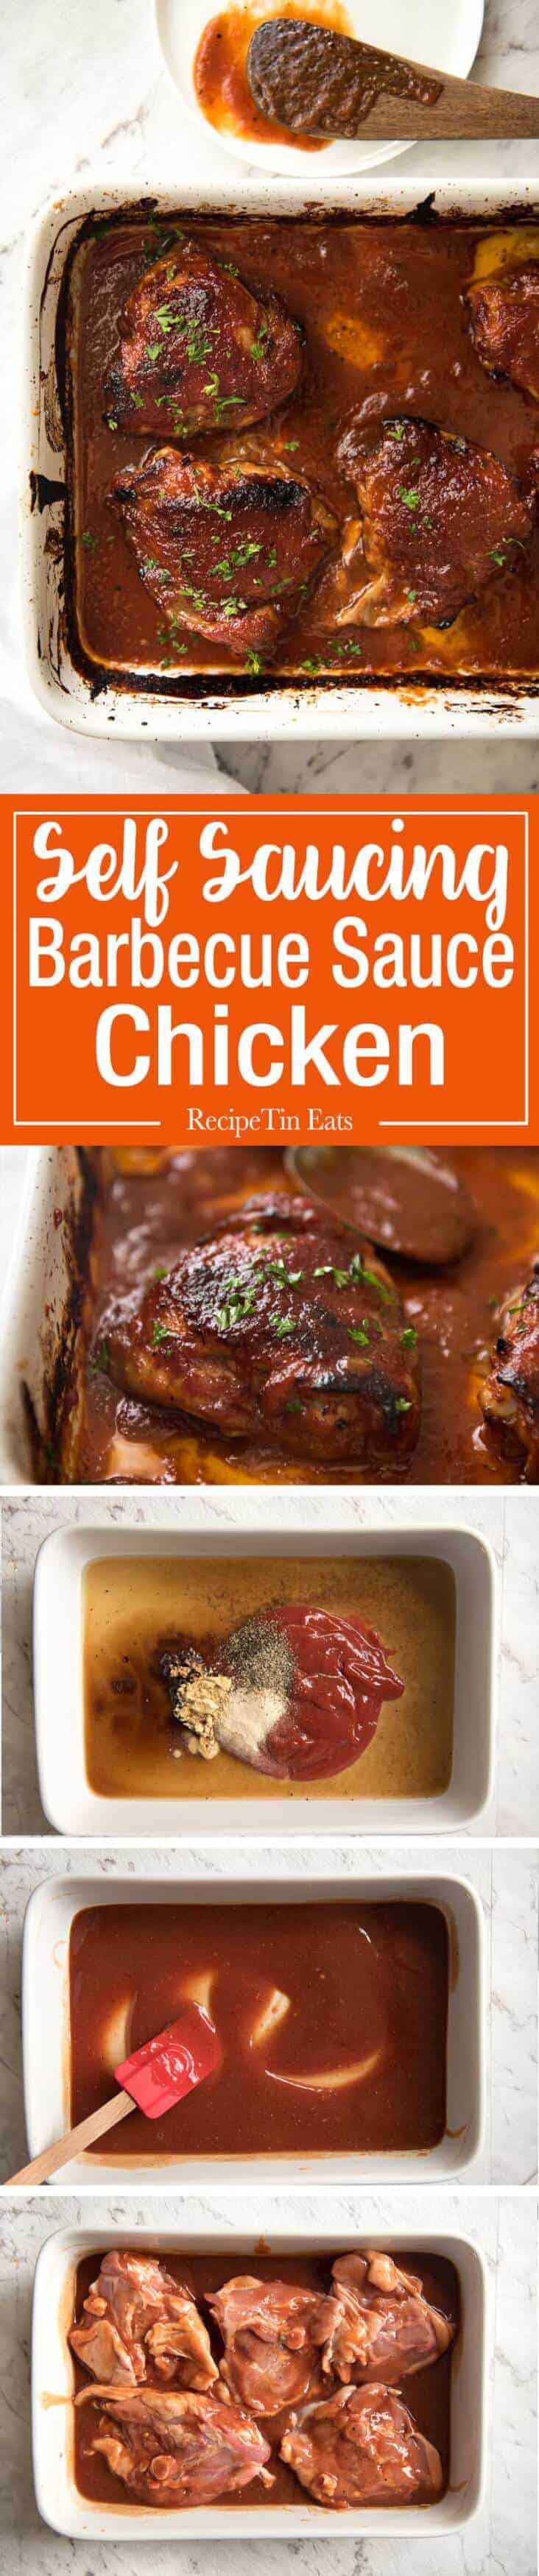 Magic Self Saucing Oven Baked Barbecue Chicken - A handful of pantry staples transforms into tender chicken smothered in a homemade barbecue sauce! recipetineats.com